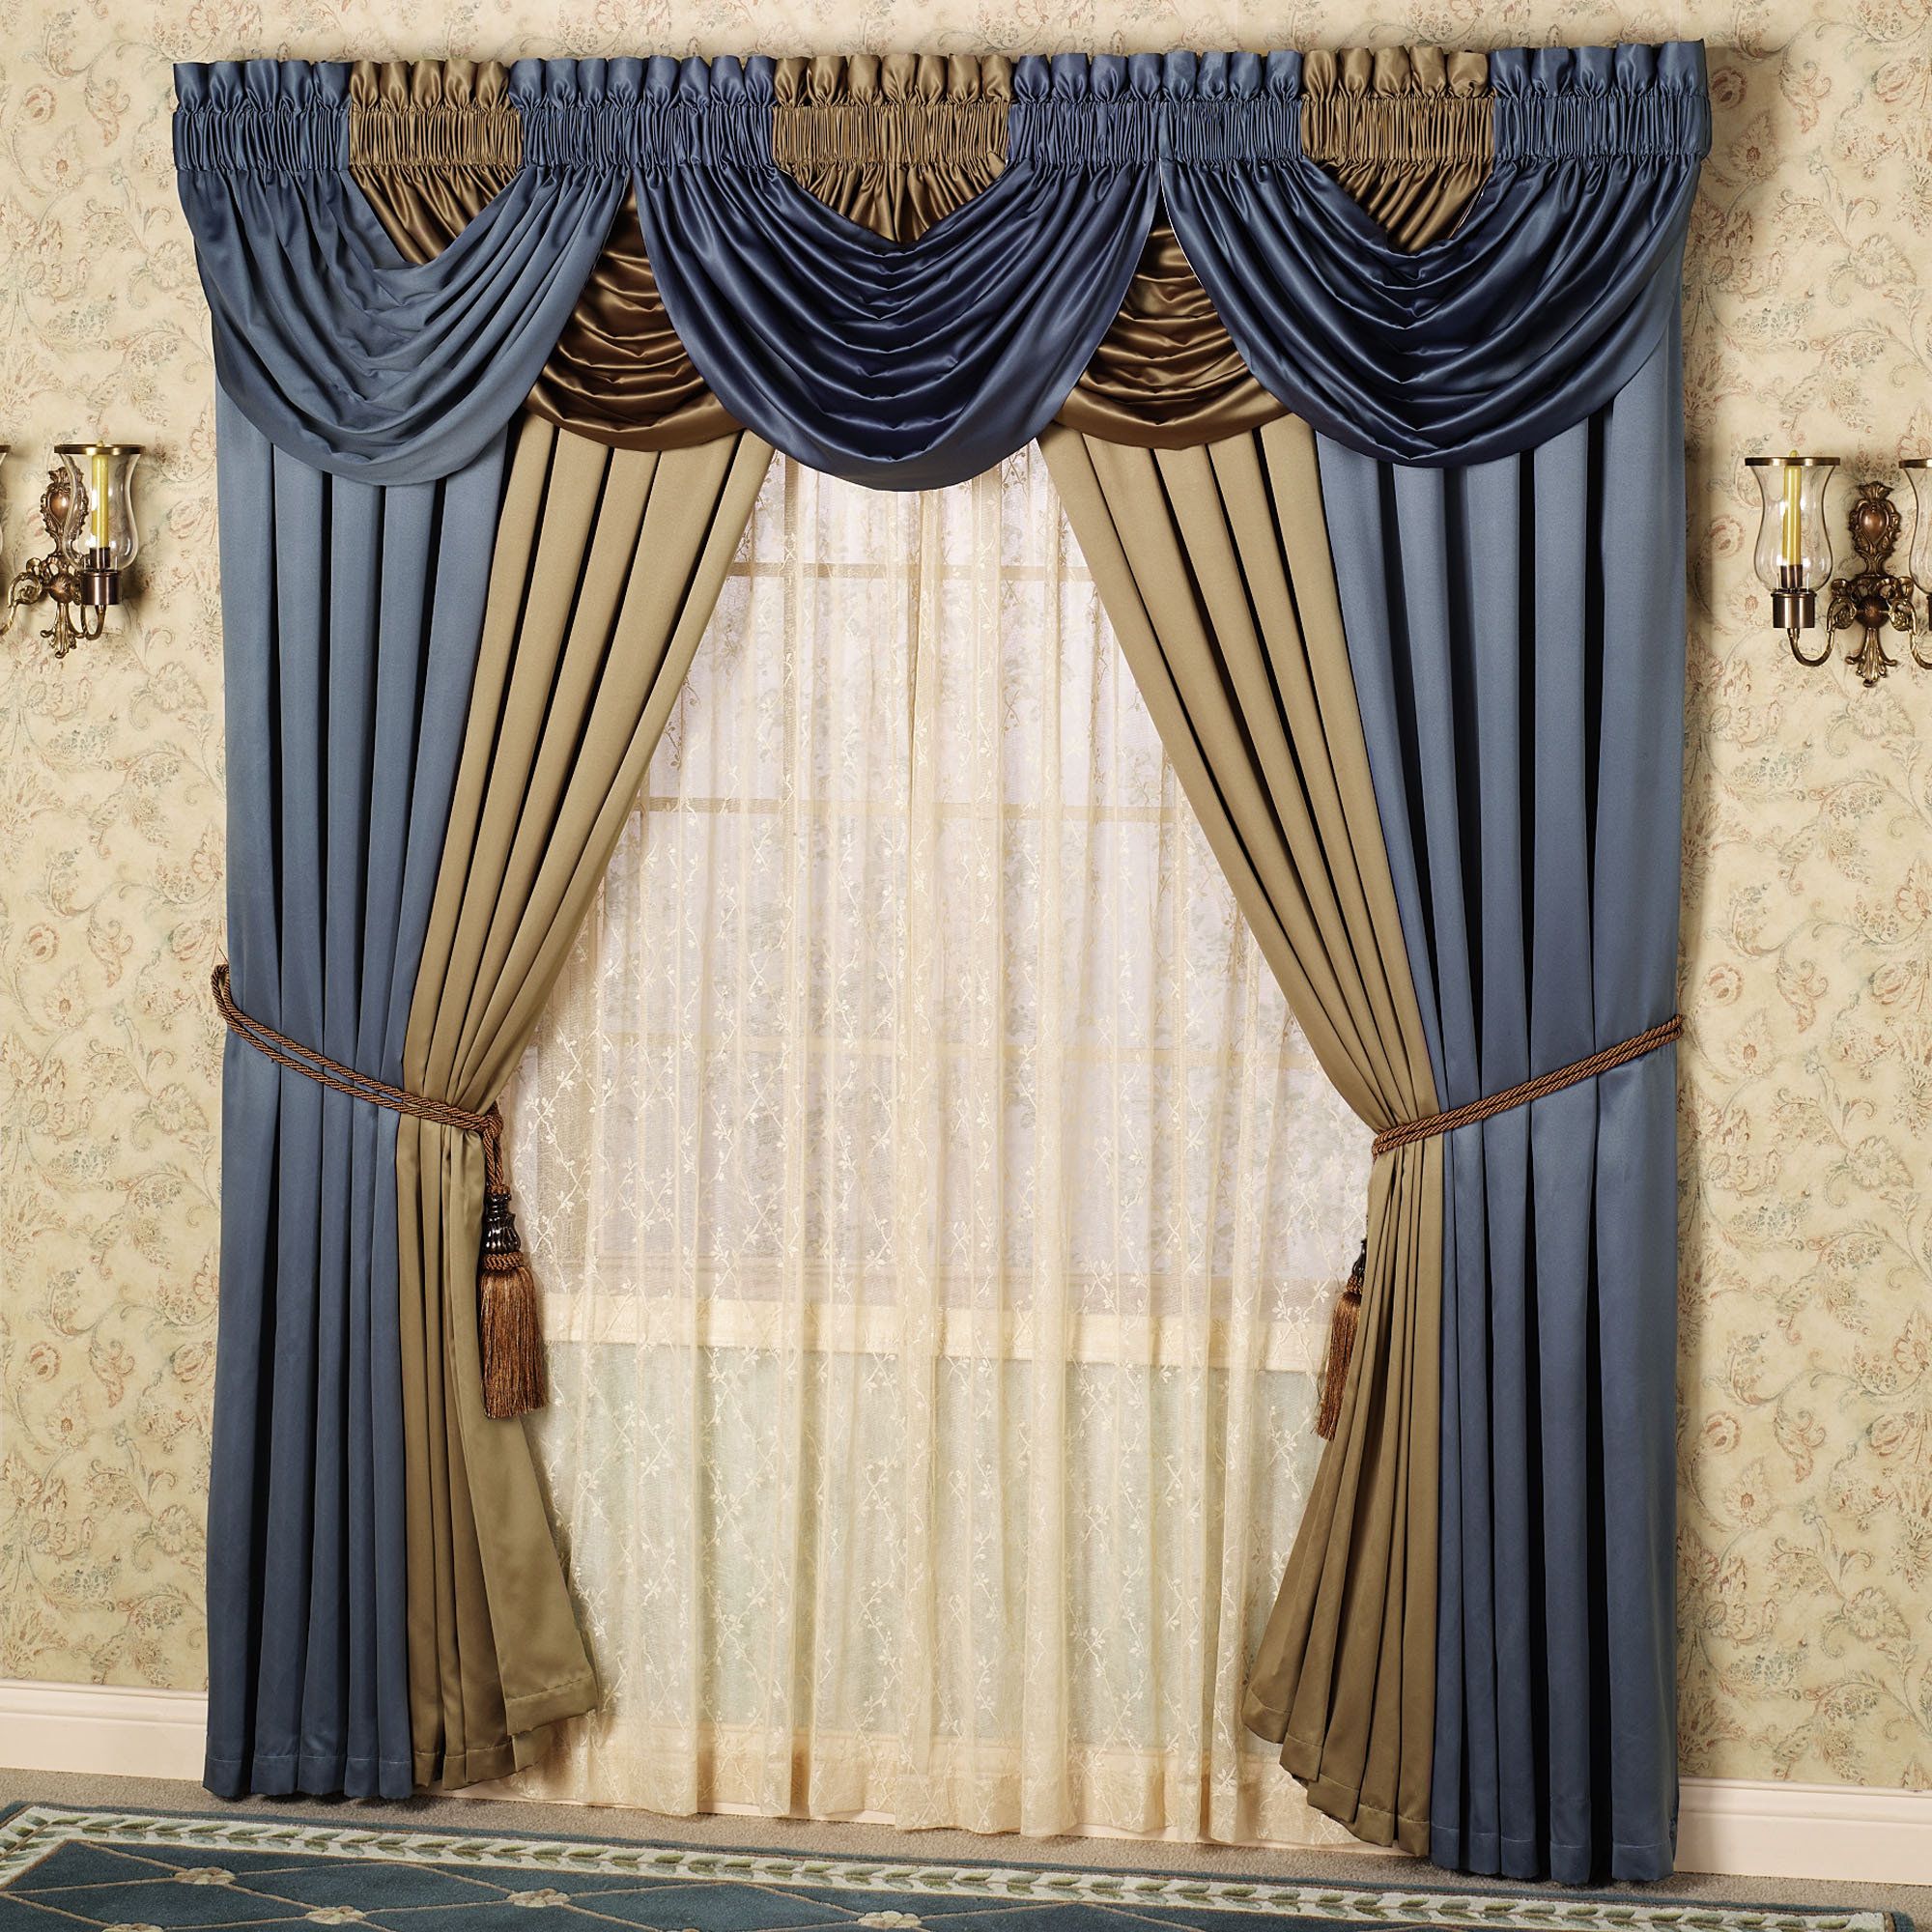 53 Elegant Kitchen Curtains Valances, Elegant Living Room With Navy Vertical Ruffled Waterfall Valance And Curtain Tiers (View 13 of 20)